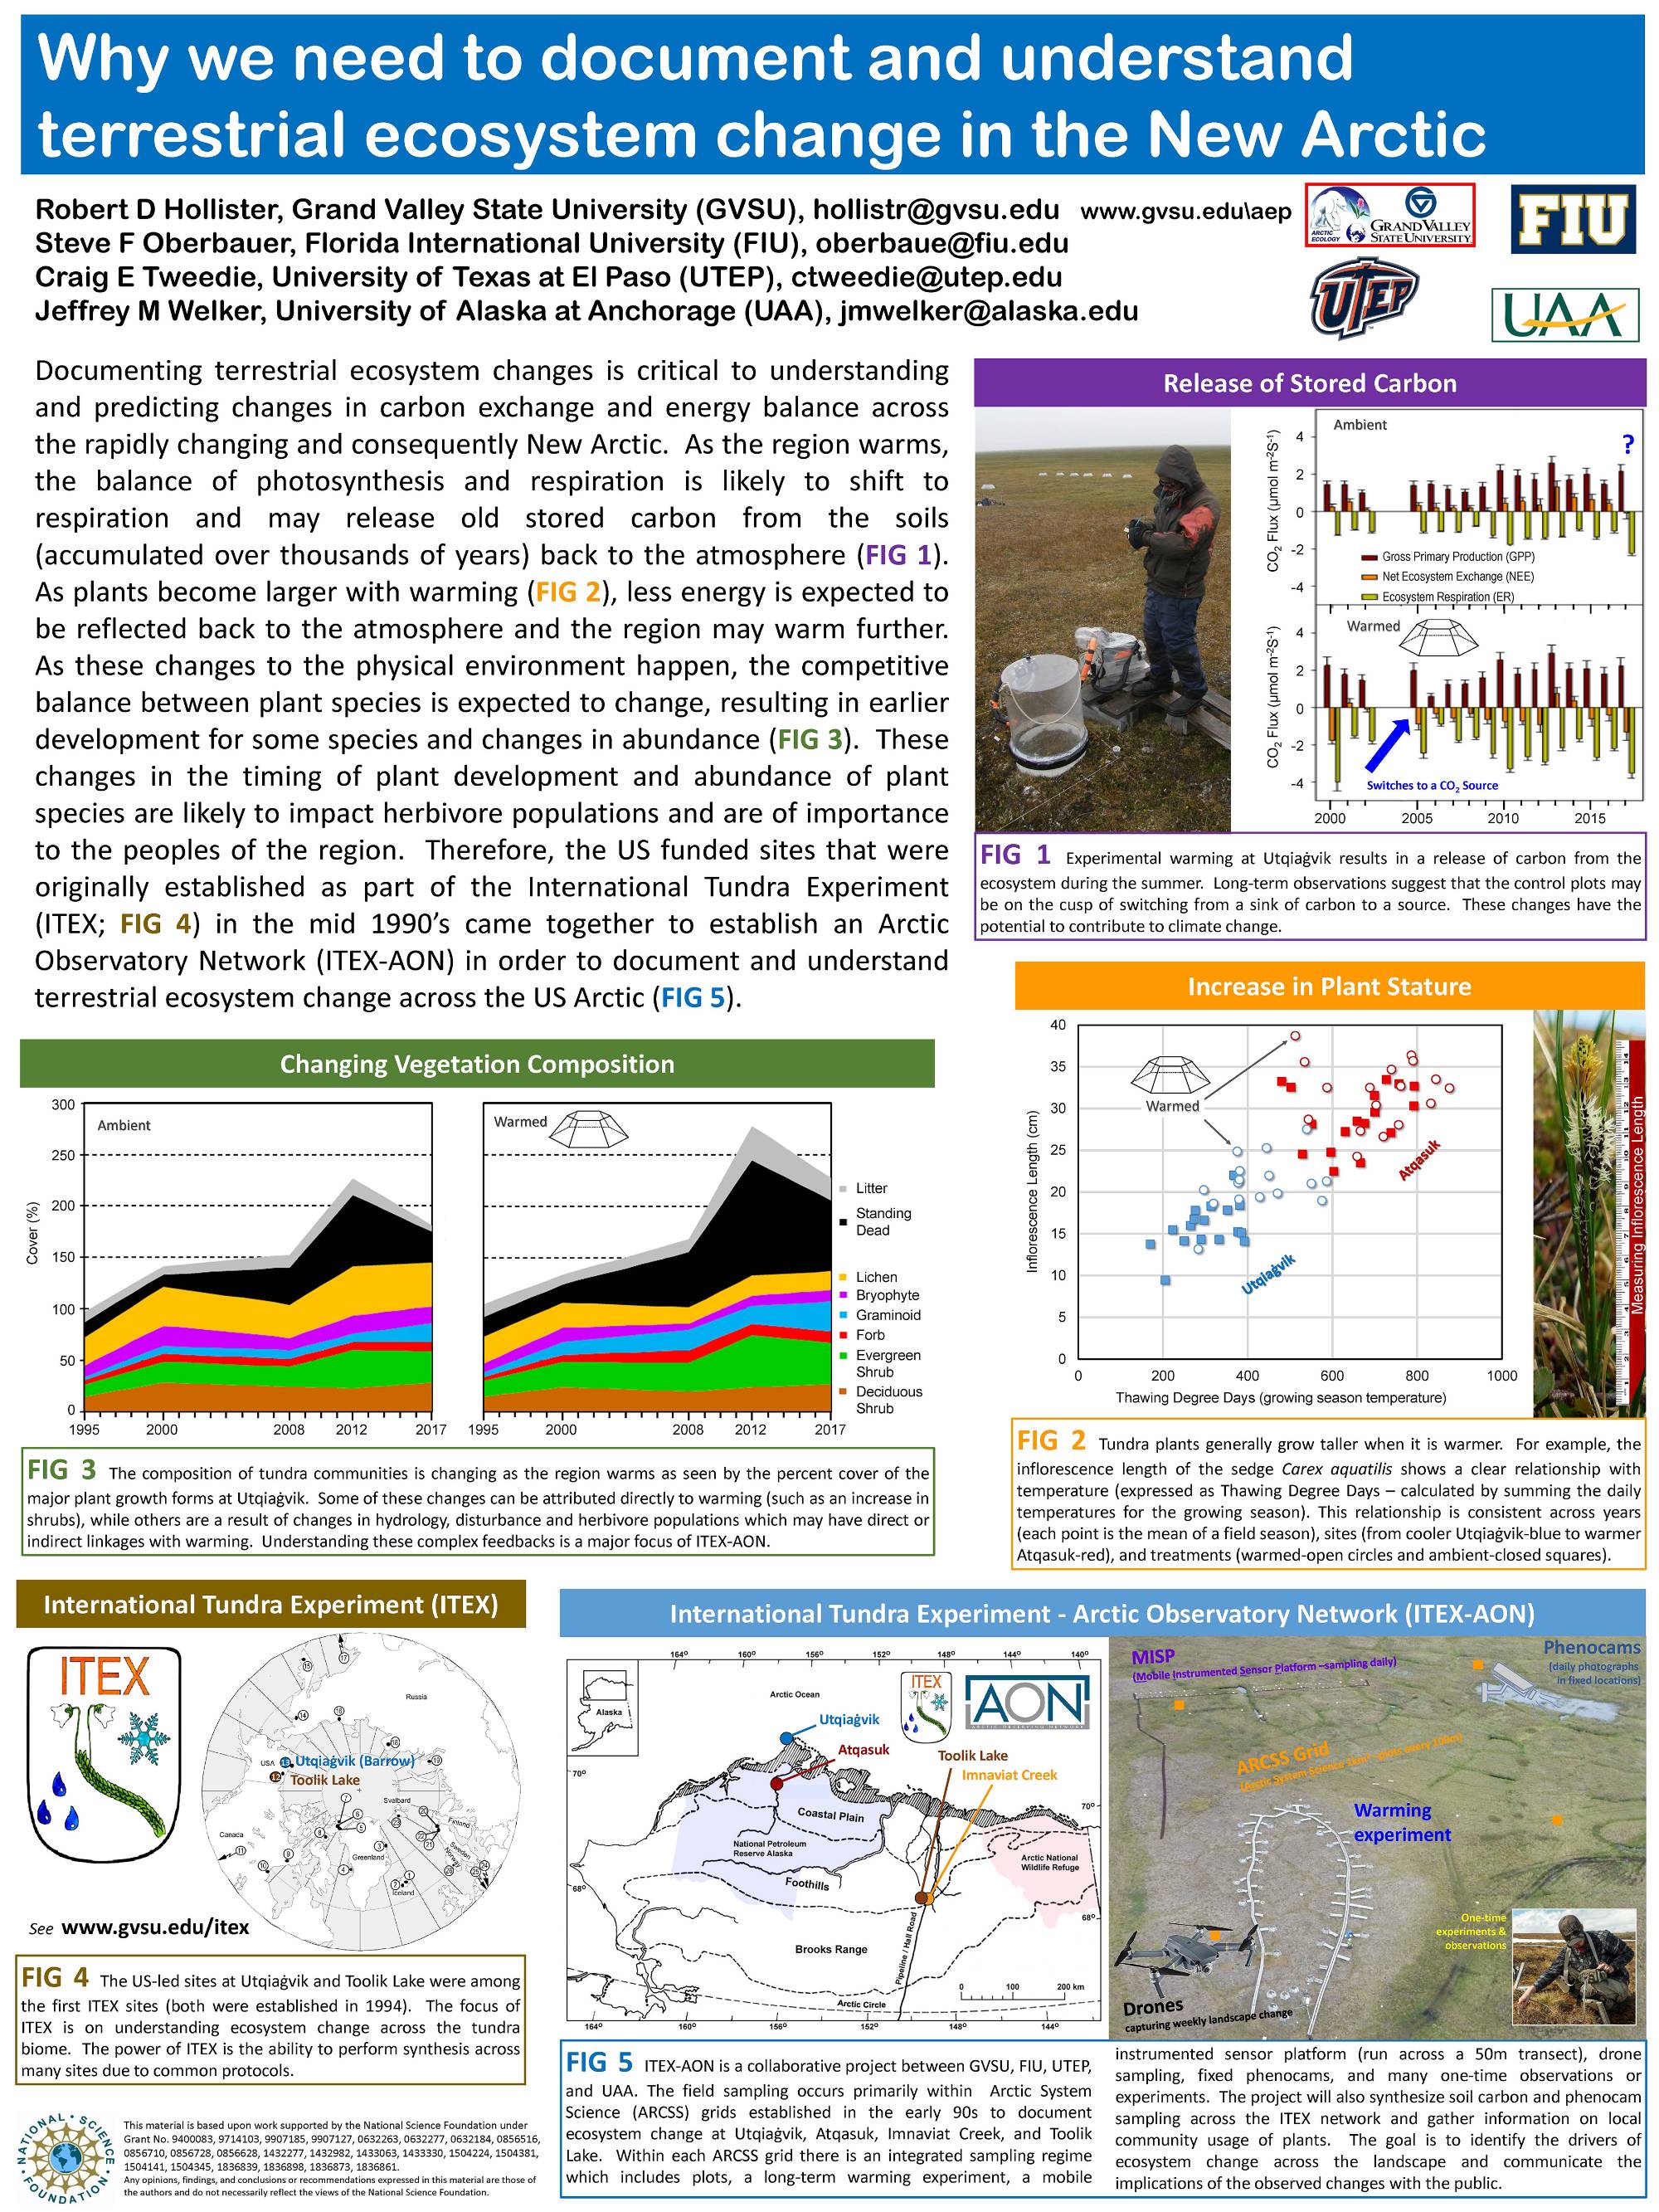 Poster explains why we need to document and understand terrestrial ecosystem change in the new arctic.